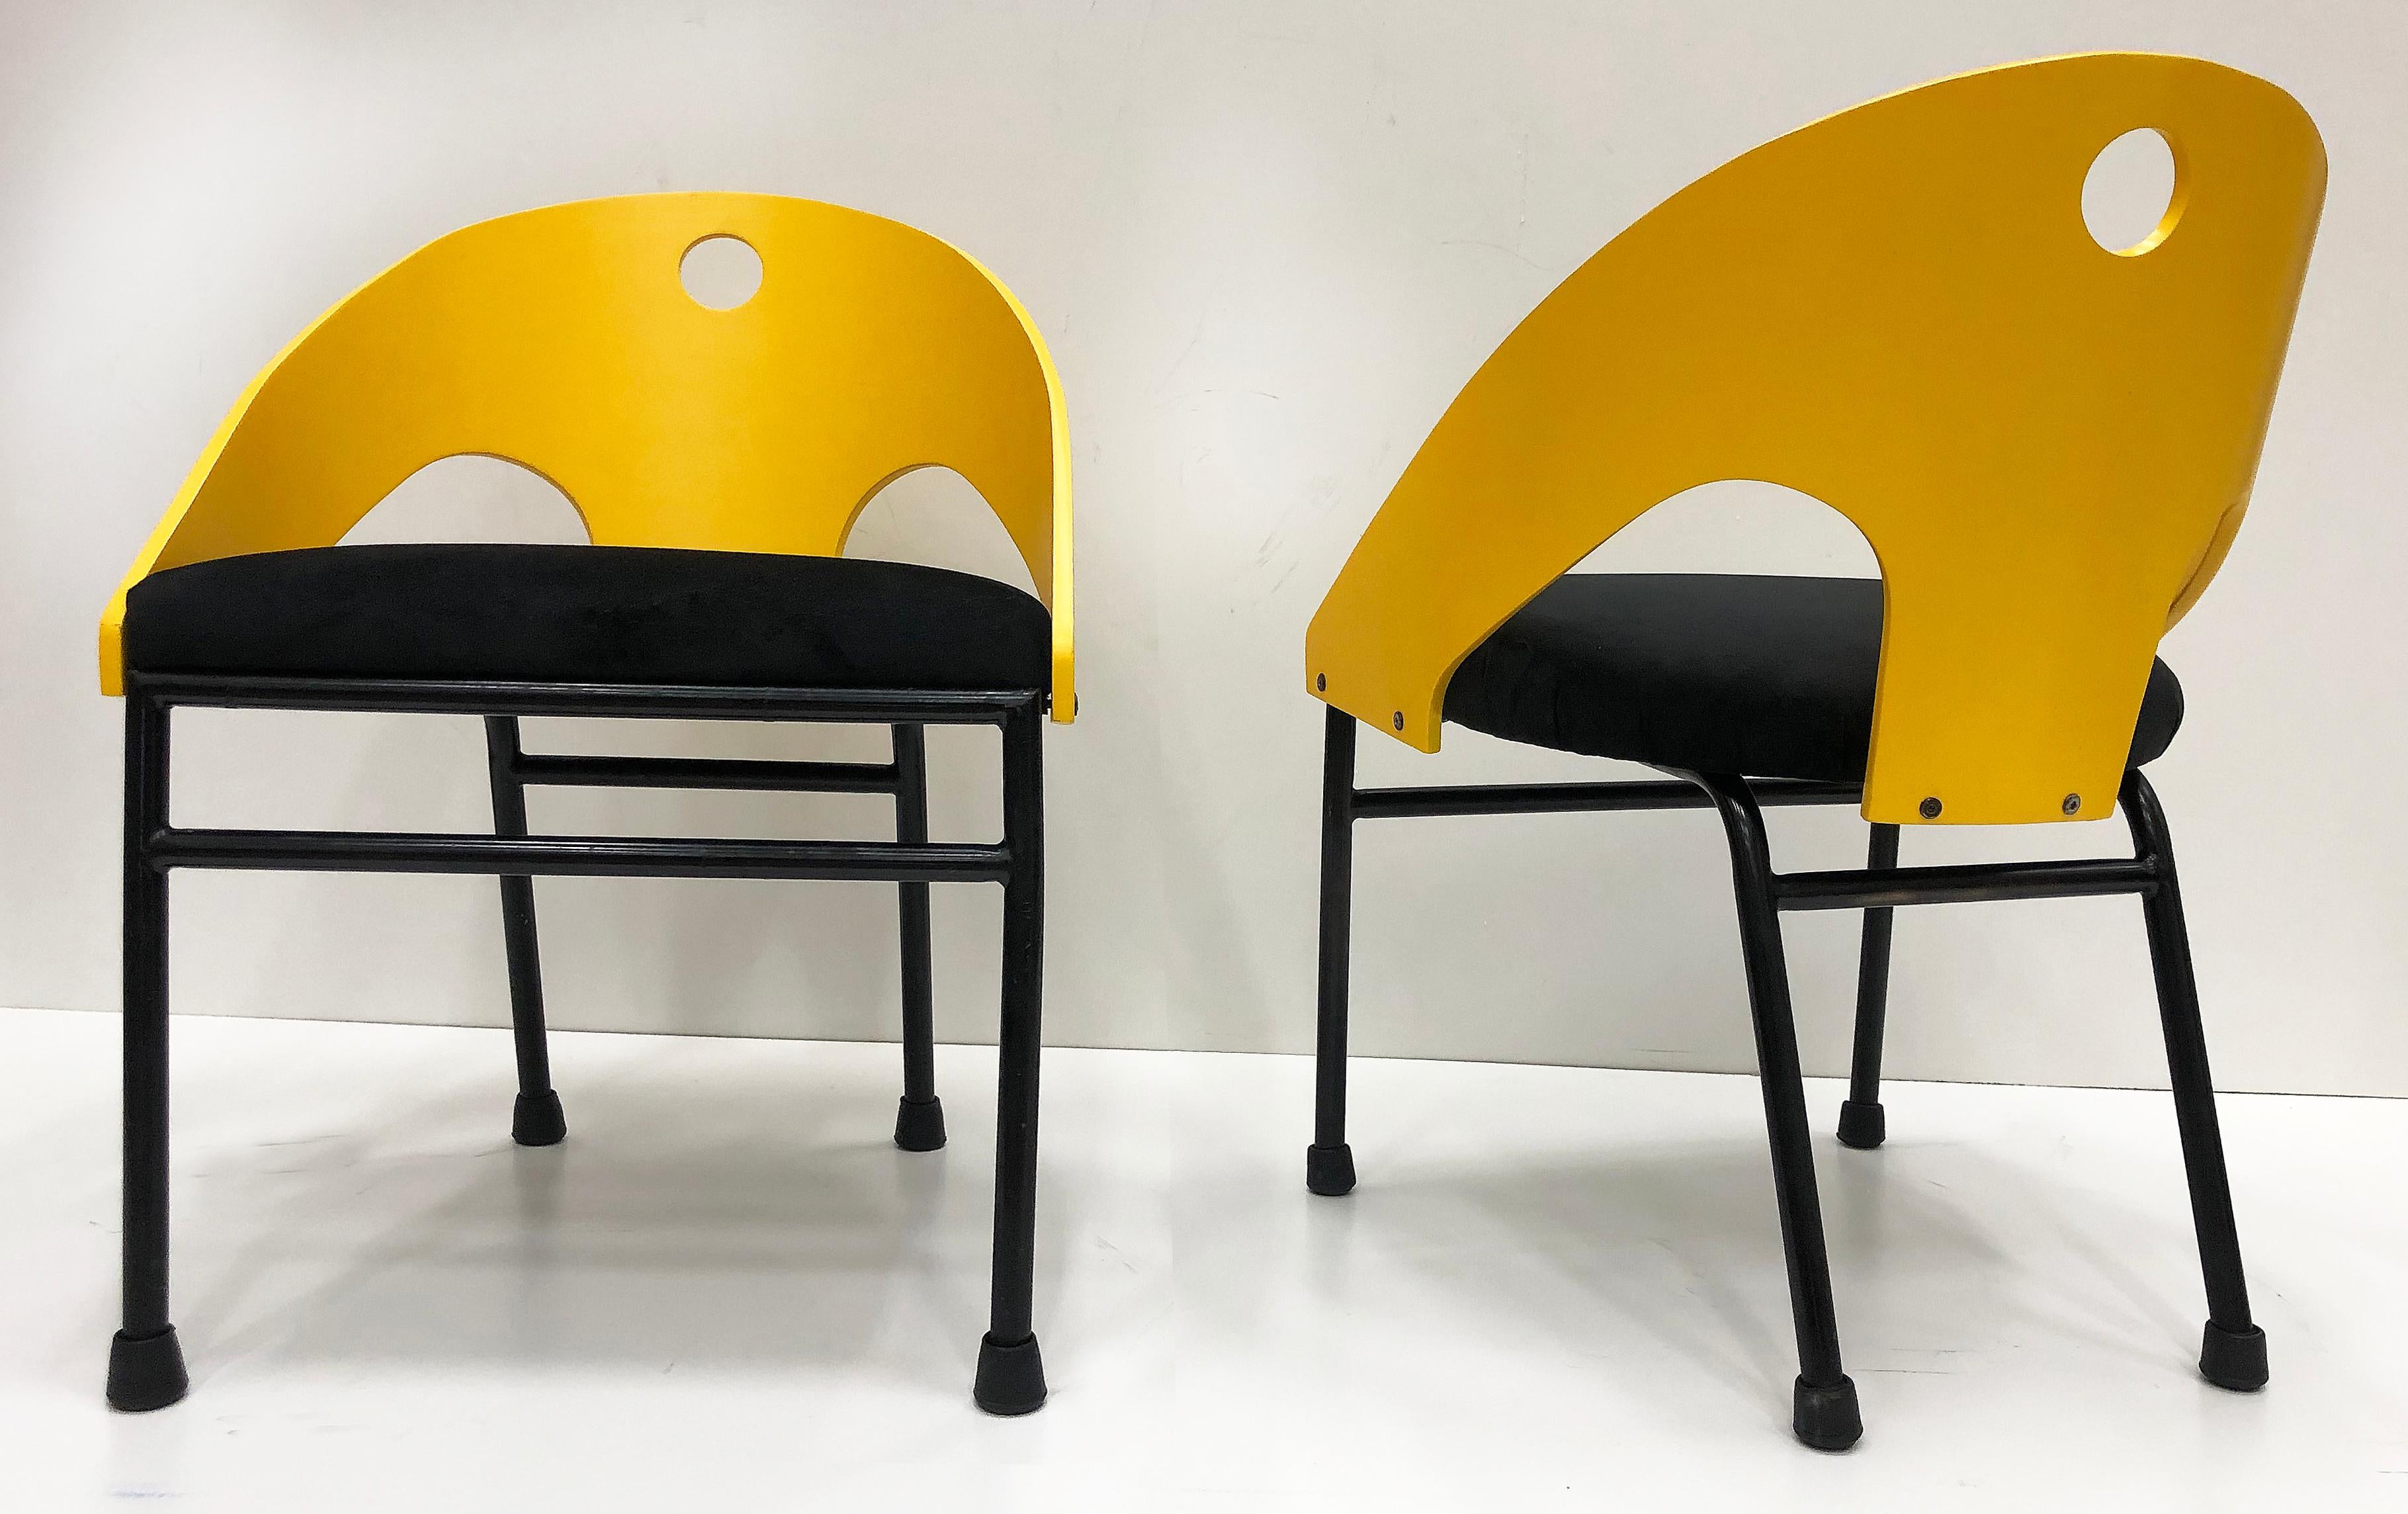 1980s Post-Modern Memphis Style chairs- 3 Pairs available

Offered for sale is a pair of 1980s Post-Modern Memphis Style accent chairs with bent-wood tops and metal bases. The pair has been completely restored and upholstered. We have 3 pairs